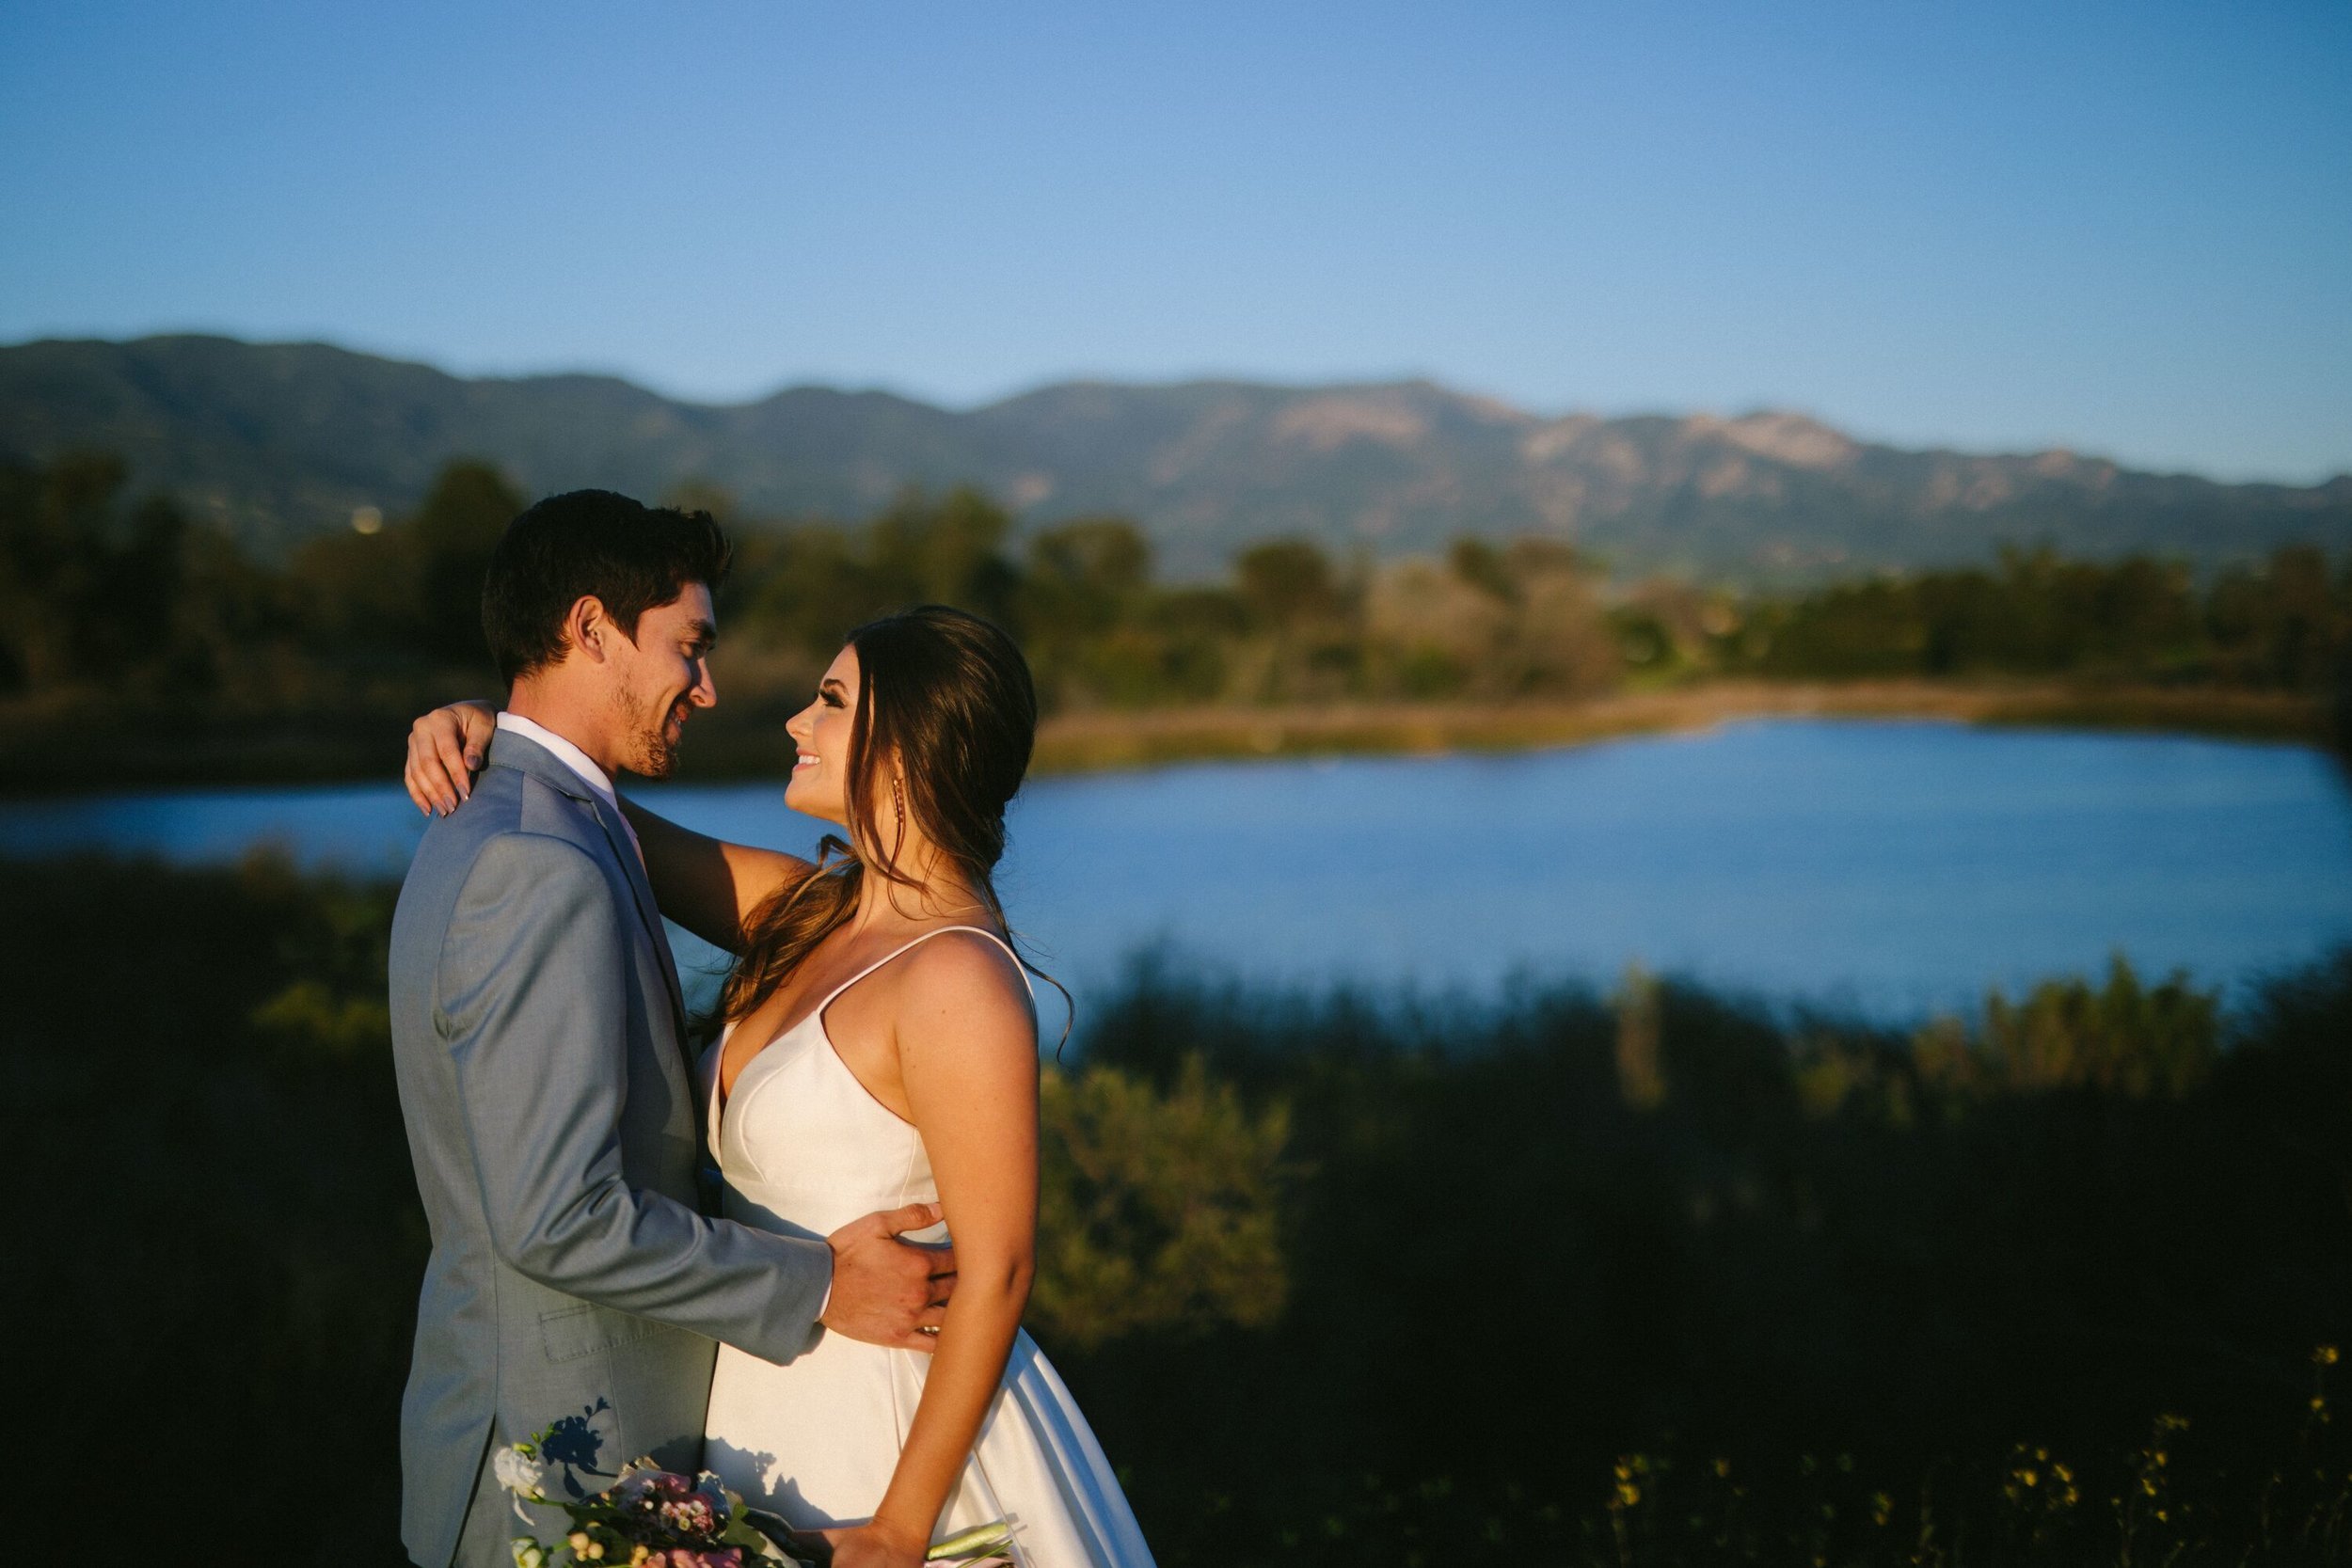 www.santabarbarawedding.com | Photographer: Patrick Ang | Venue: Rancho La Patera &amp; Stow House | Wedding Planner: Elyse Rowen of Elyse Events | Bride and Groom Overlooking Water